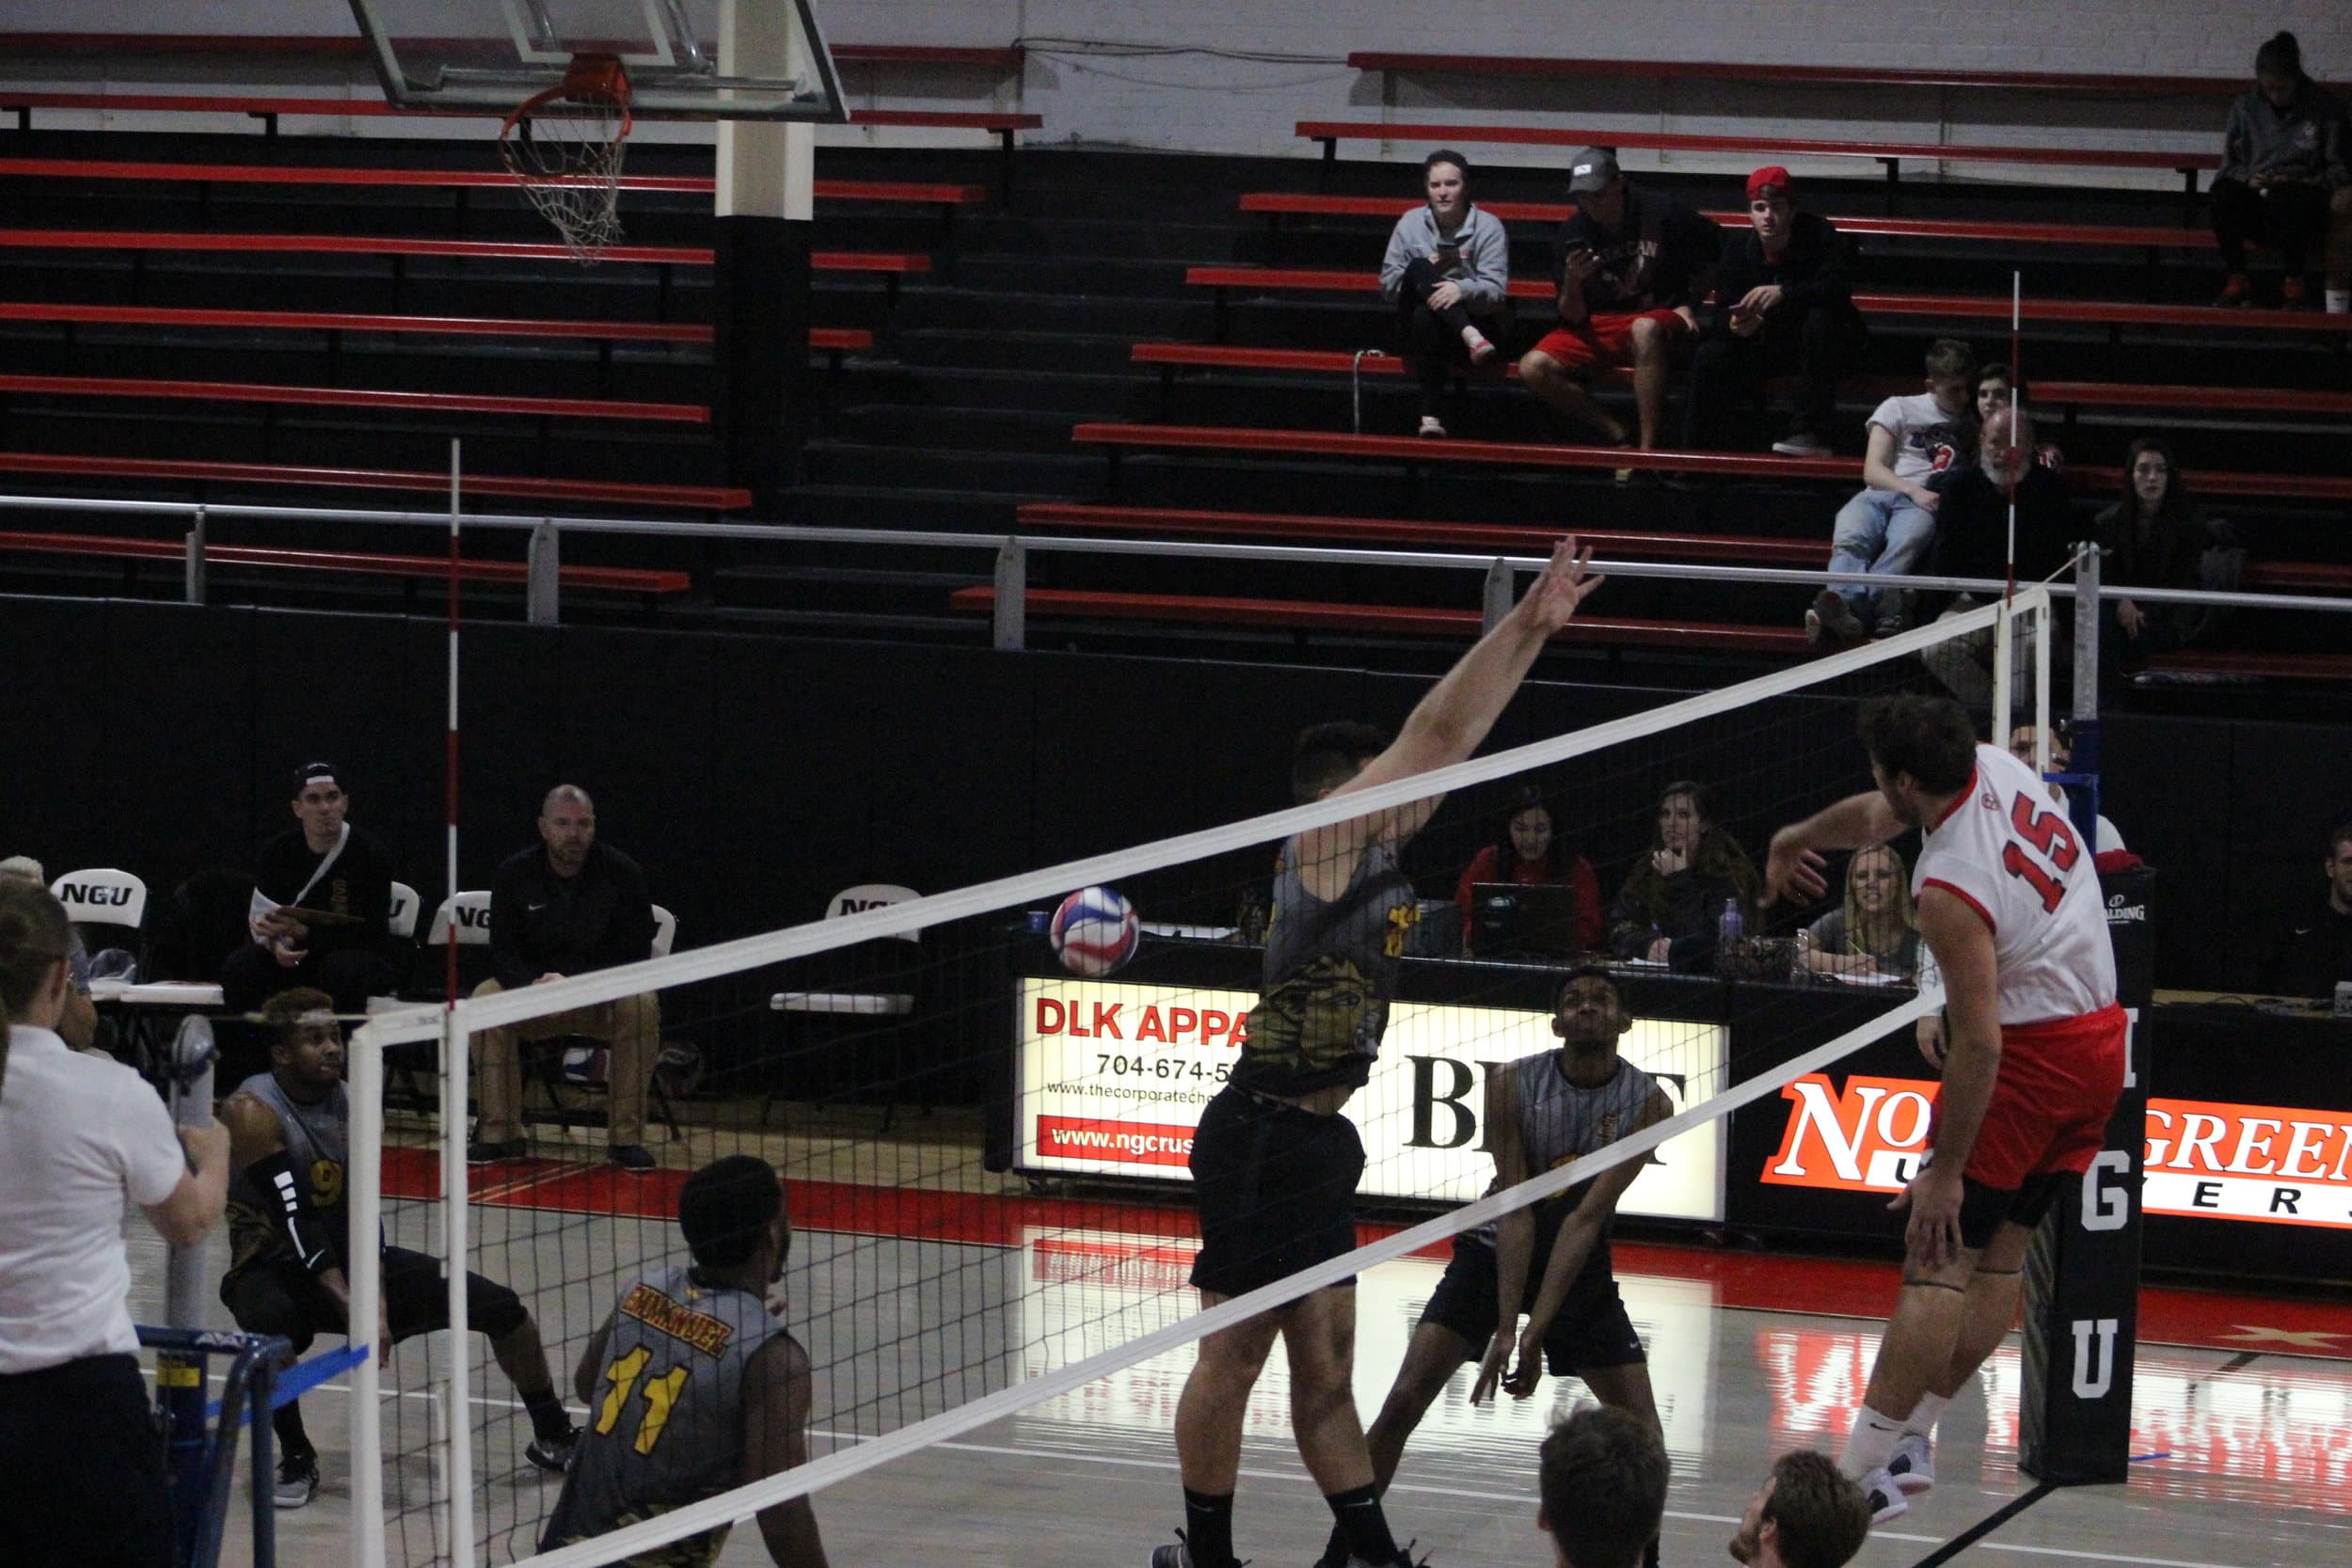 Number 15 Matthew McManaway with the winning spike. Ending the game in victory for the Crusaders.